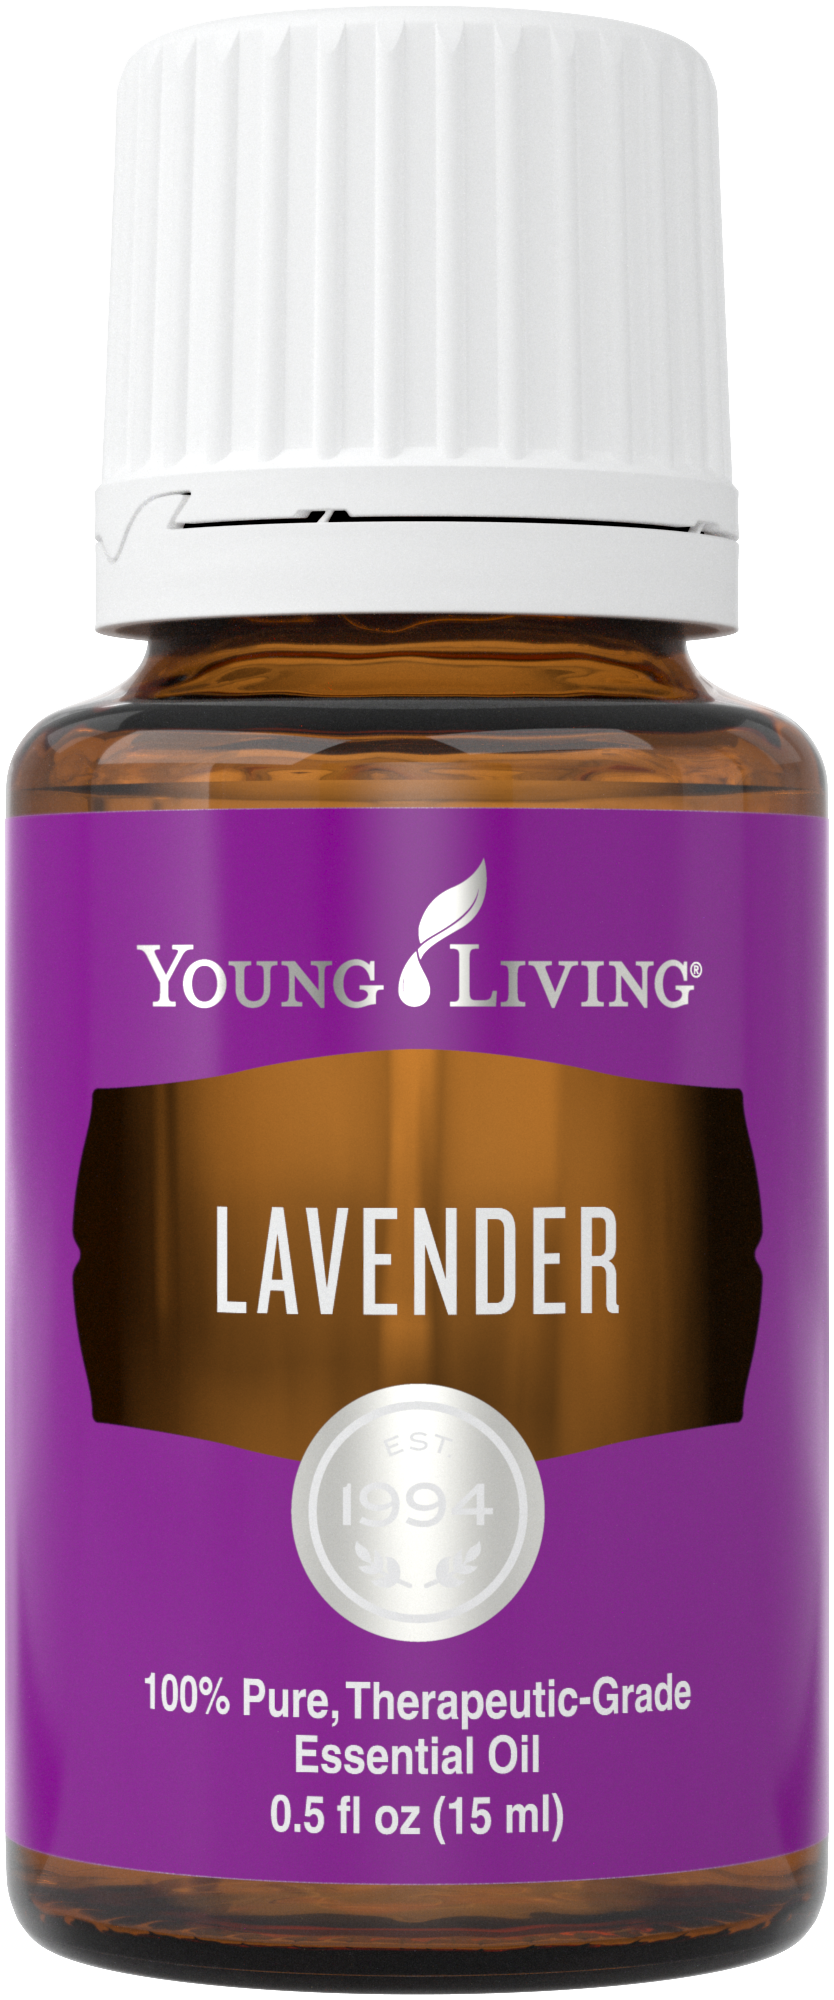 Lavender essential oil uses | Young Living